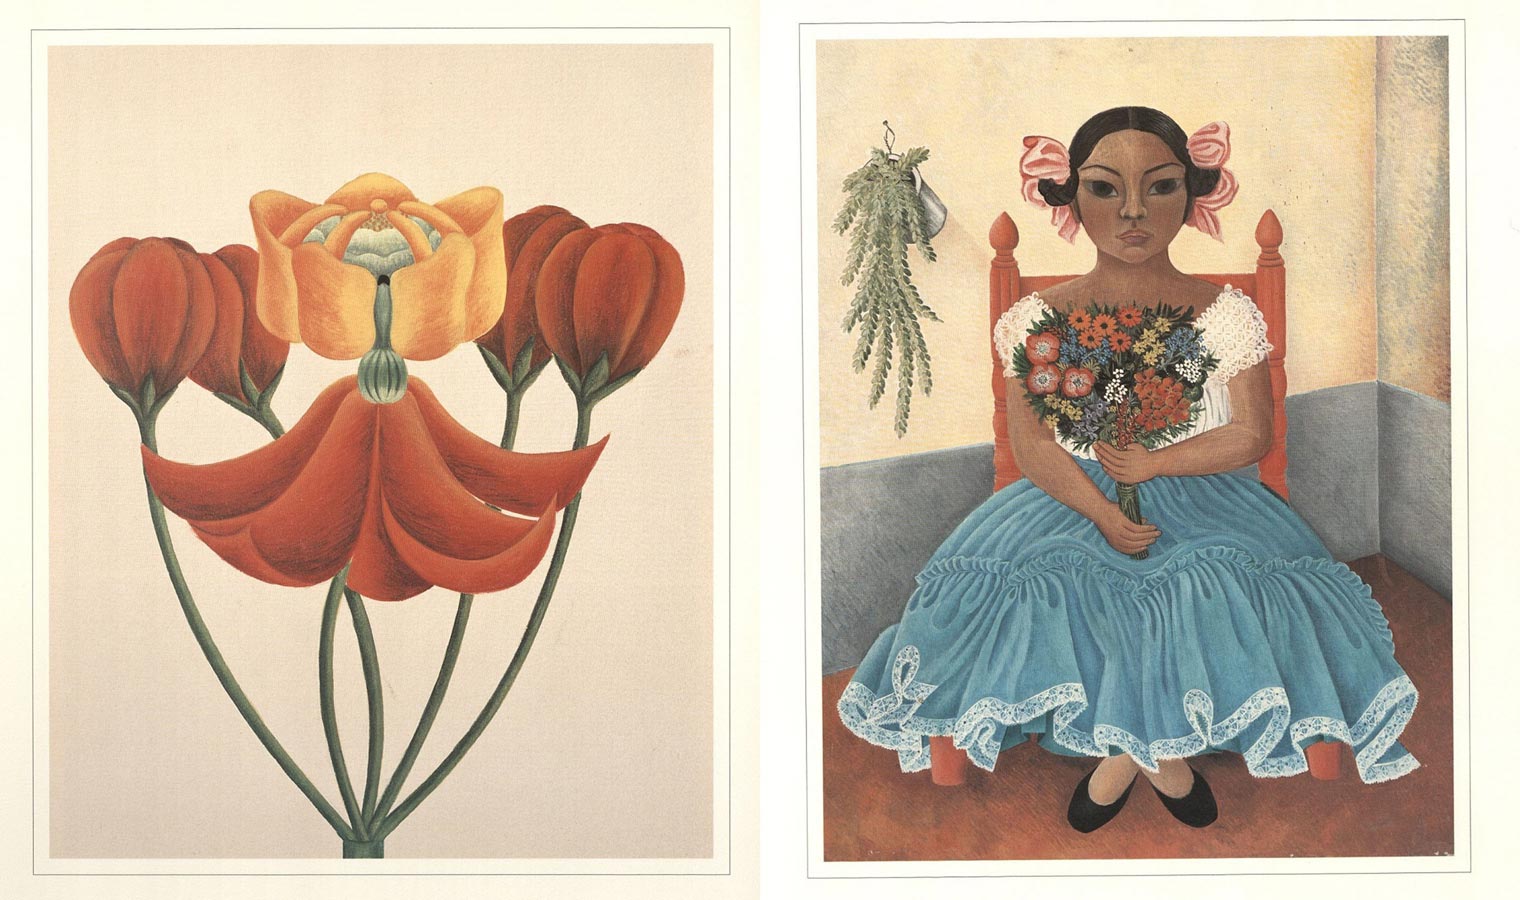 Left: painting of red and yellow flowers. Right: painting of a young seated woman holding a bouquet of flowers, wearing a blue skirt with white lace edging 